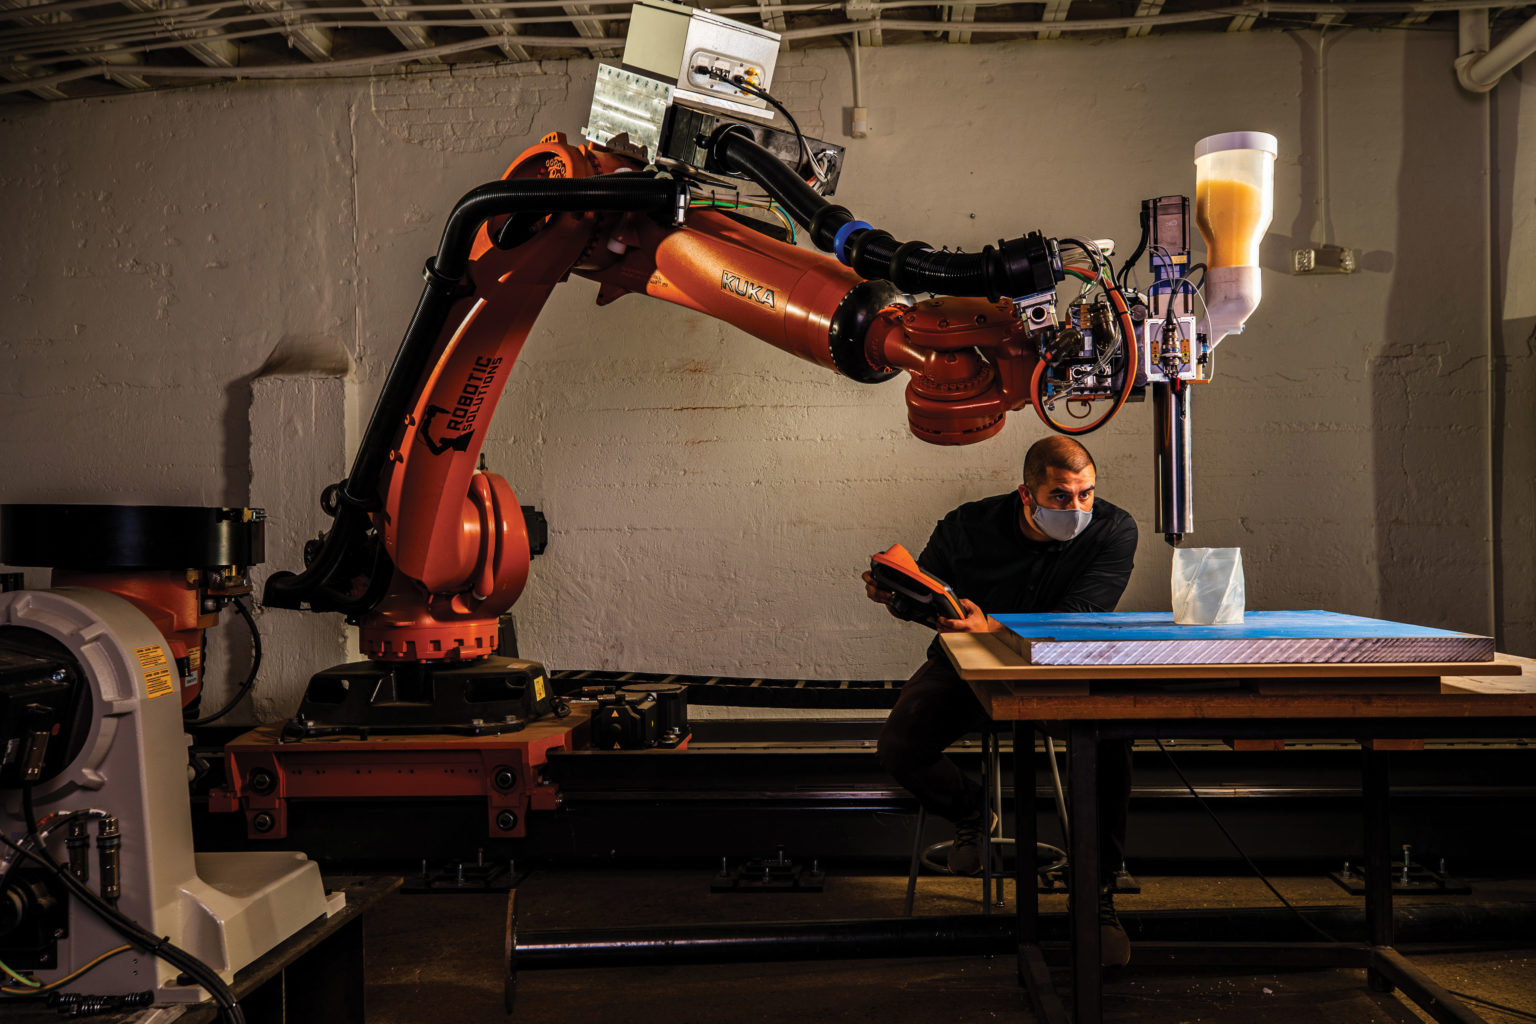 A large robotic arm fills a room while a man uses it to create a 3D prototype